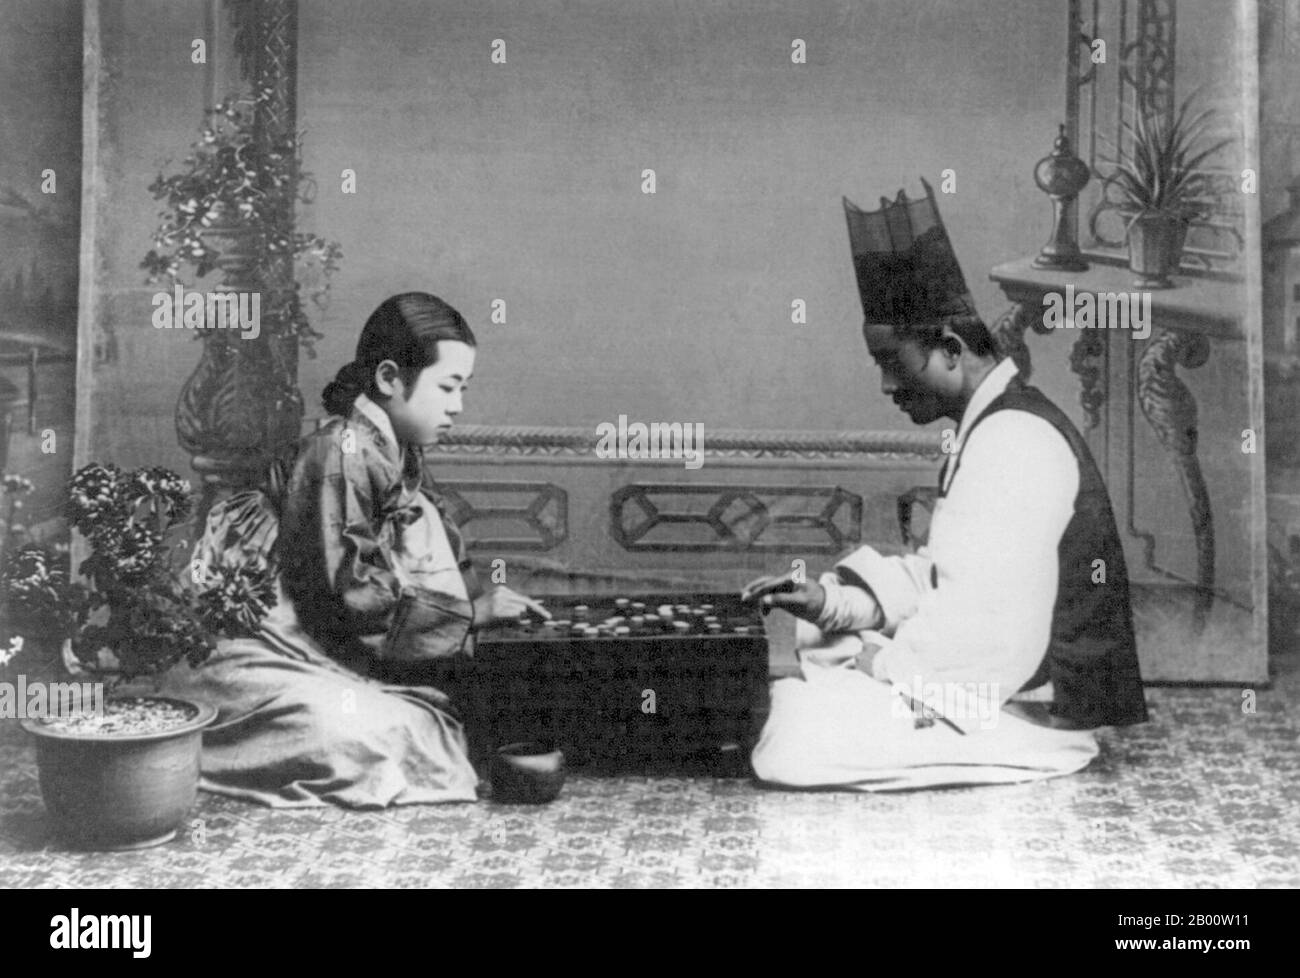 Korea: A man and a woman playing a game of 'baduk' or 'go', c. 1910.  Go (Japanese), known as 'weiqi' in Chinese and 'baduk' in Korean, is an ancient board game for two players that is noted for being rich in strategy despite its relatively simple rules. Stock Photo